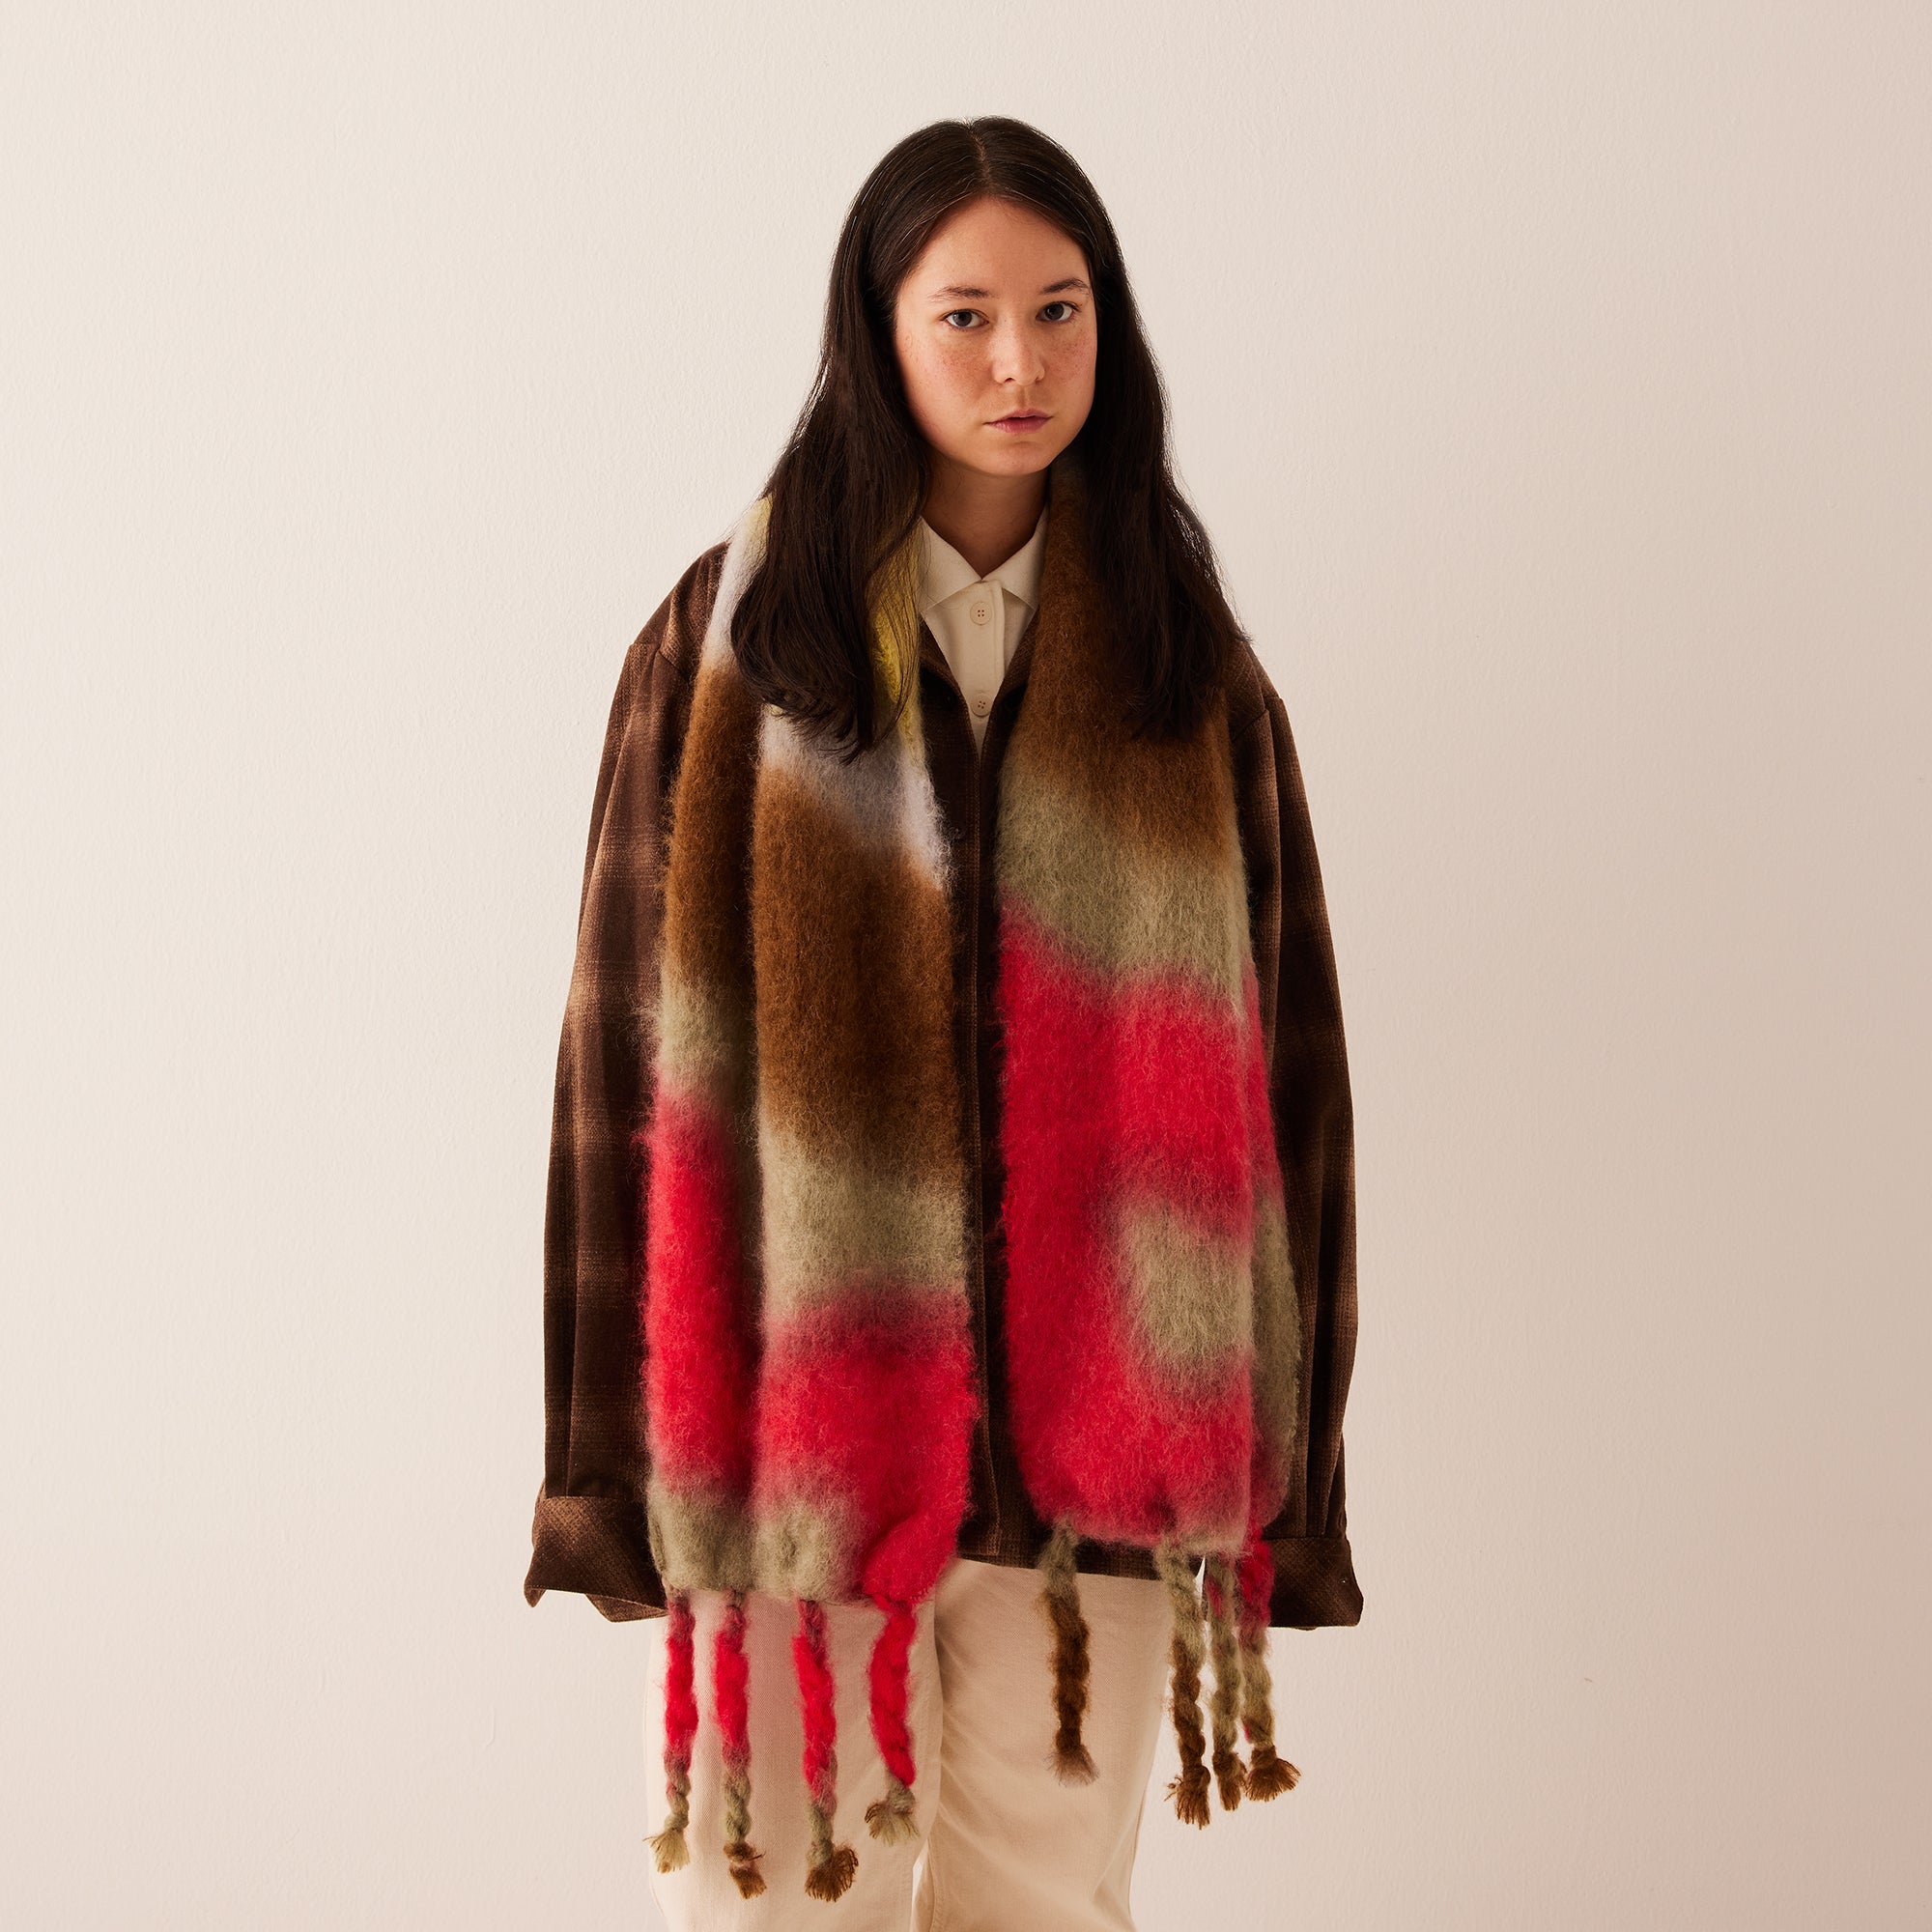 7 Sustainable Scarves To Bundle Up This Season - The Good Trade